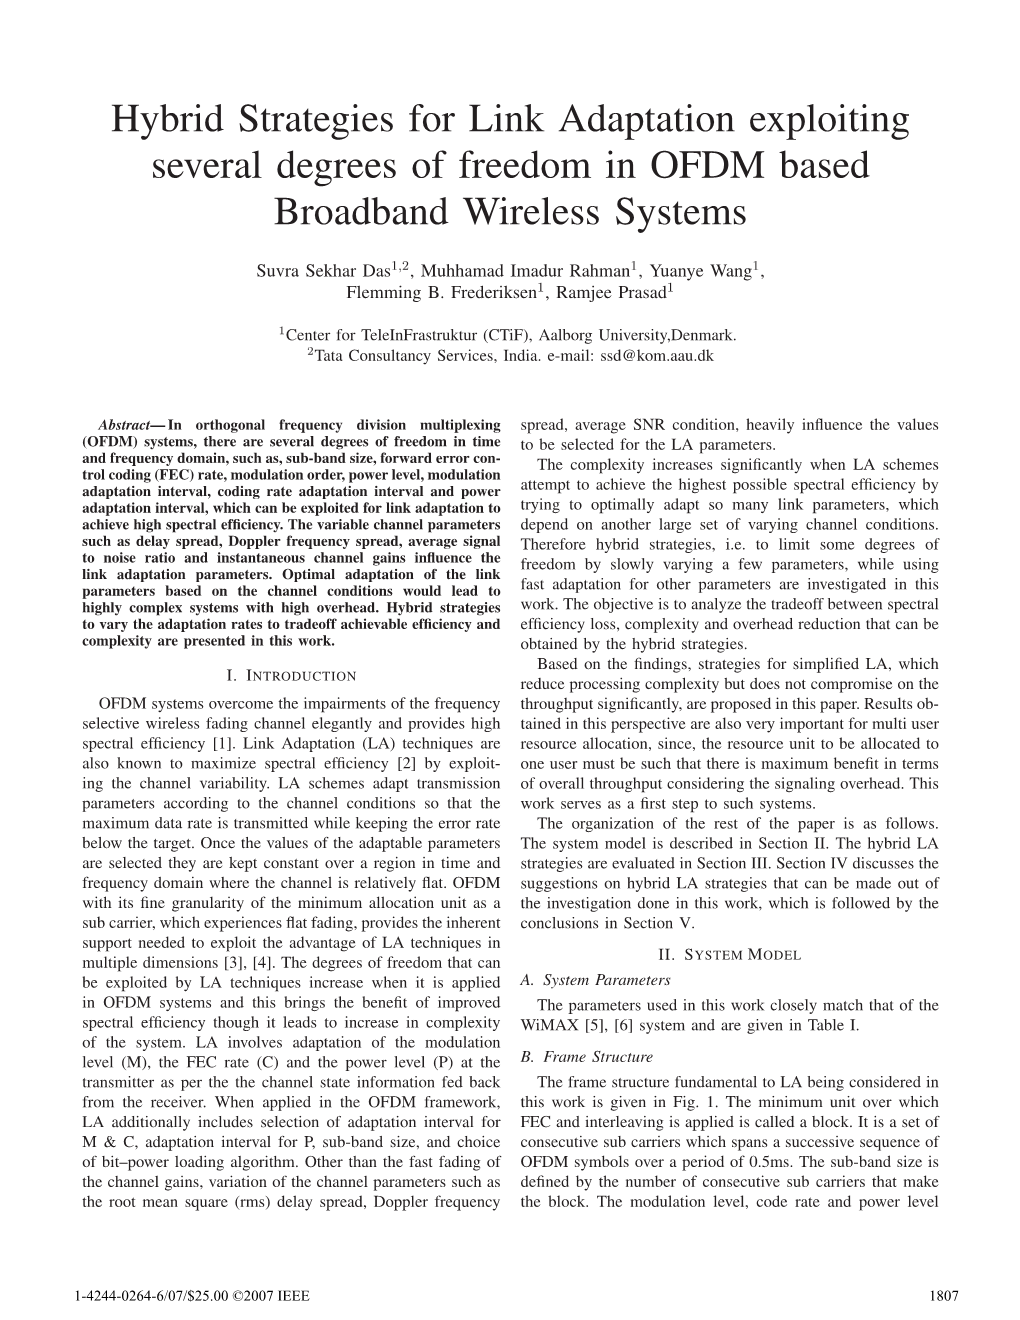 Hybrid Strategies for Link Adaptation Exploiting Several Degrees of Freedom in OFDM Based Broadband Wireless Systems